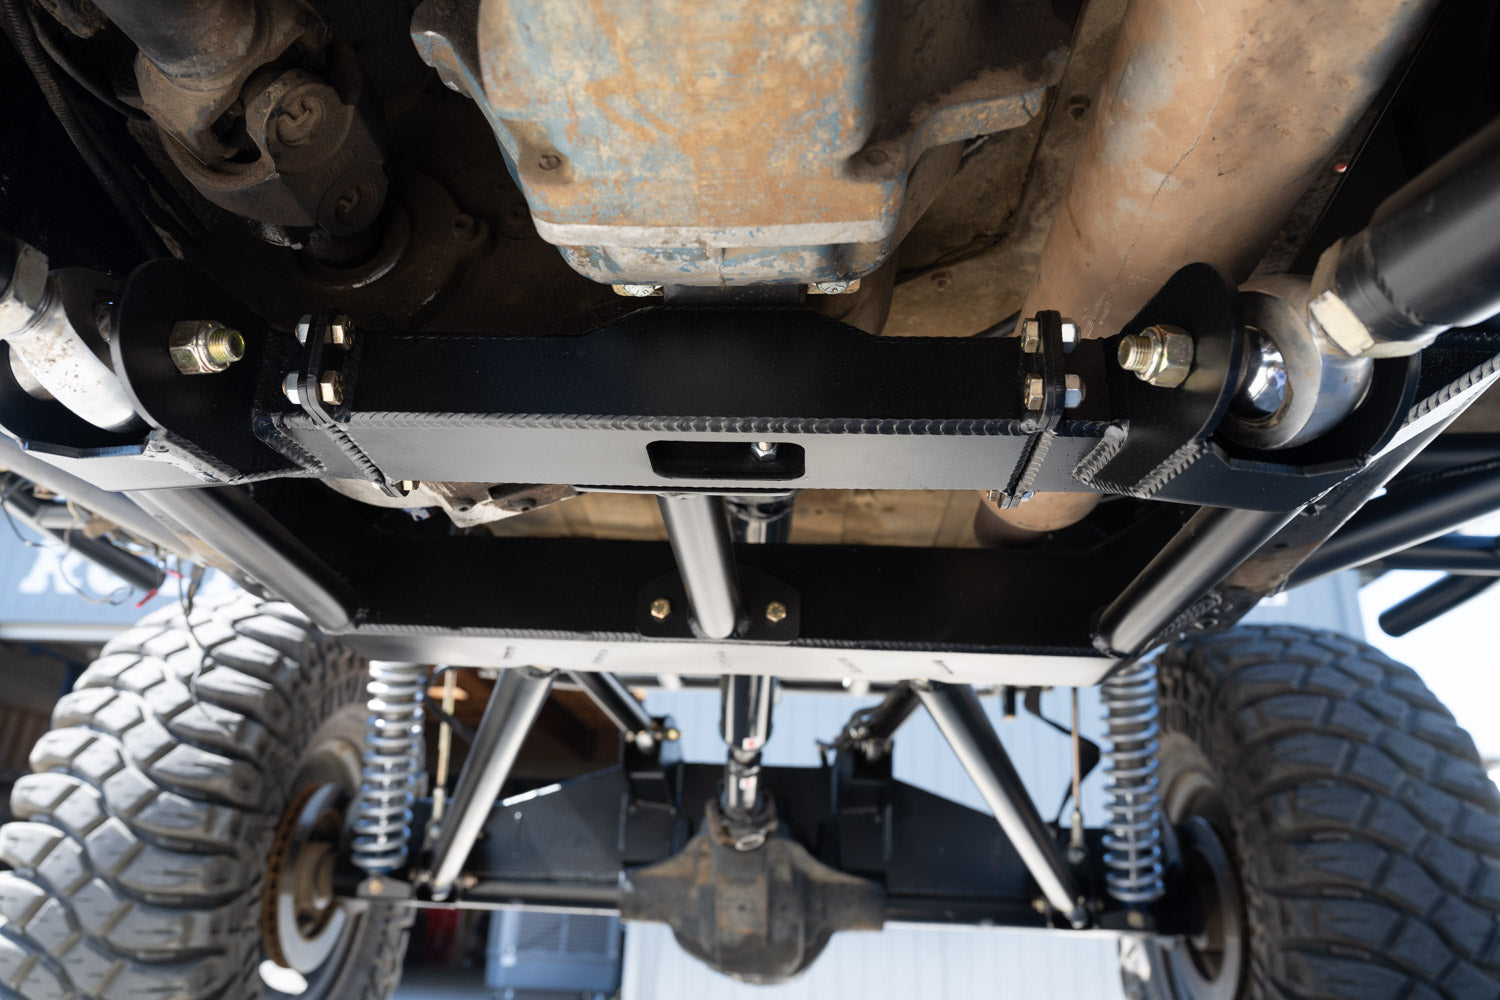 Classic Toyota FJ40 Offroad 3 link suspension build rock and road